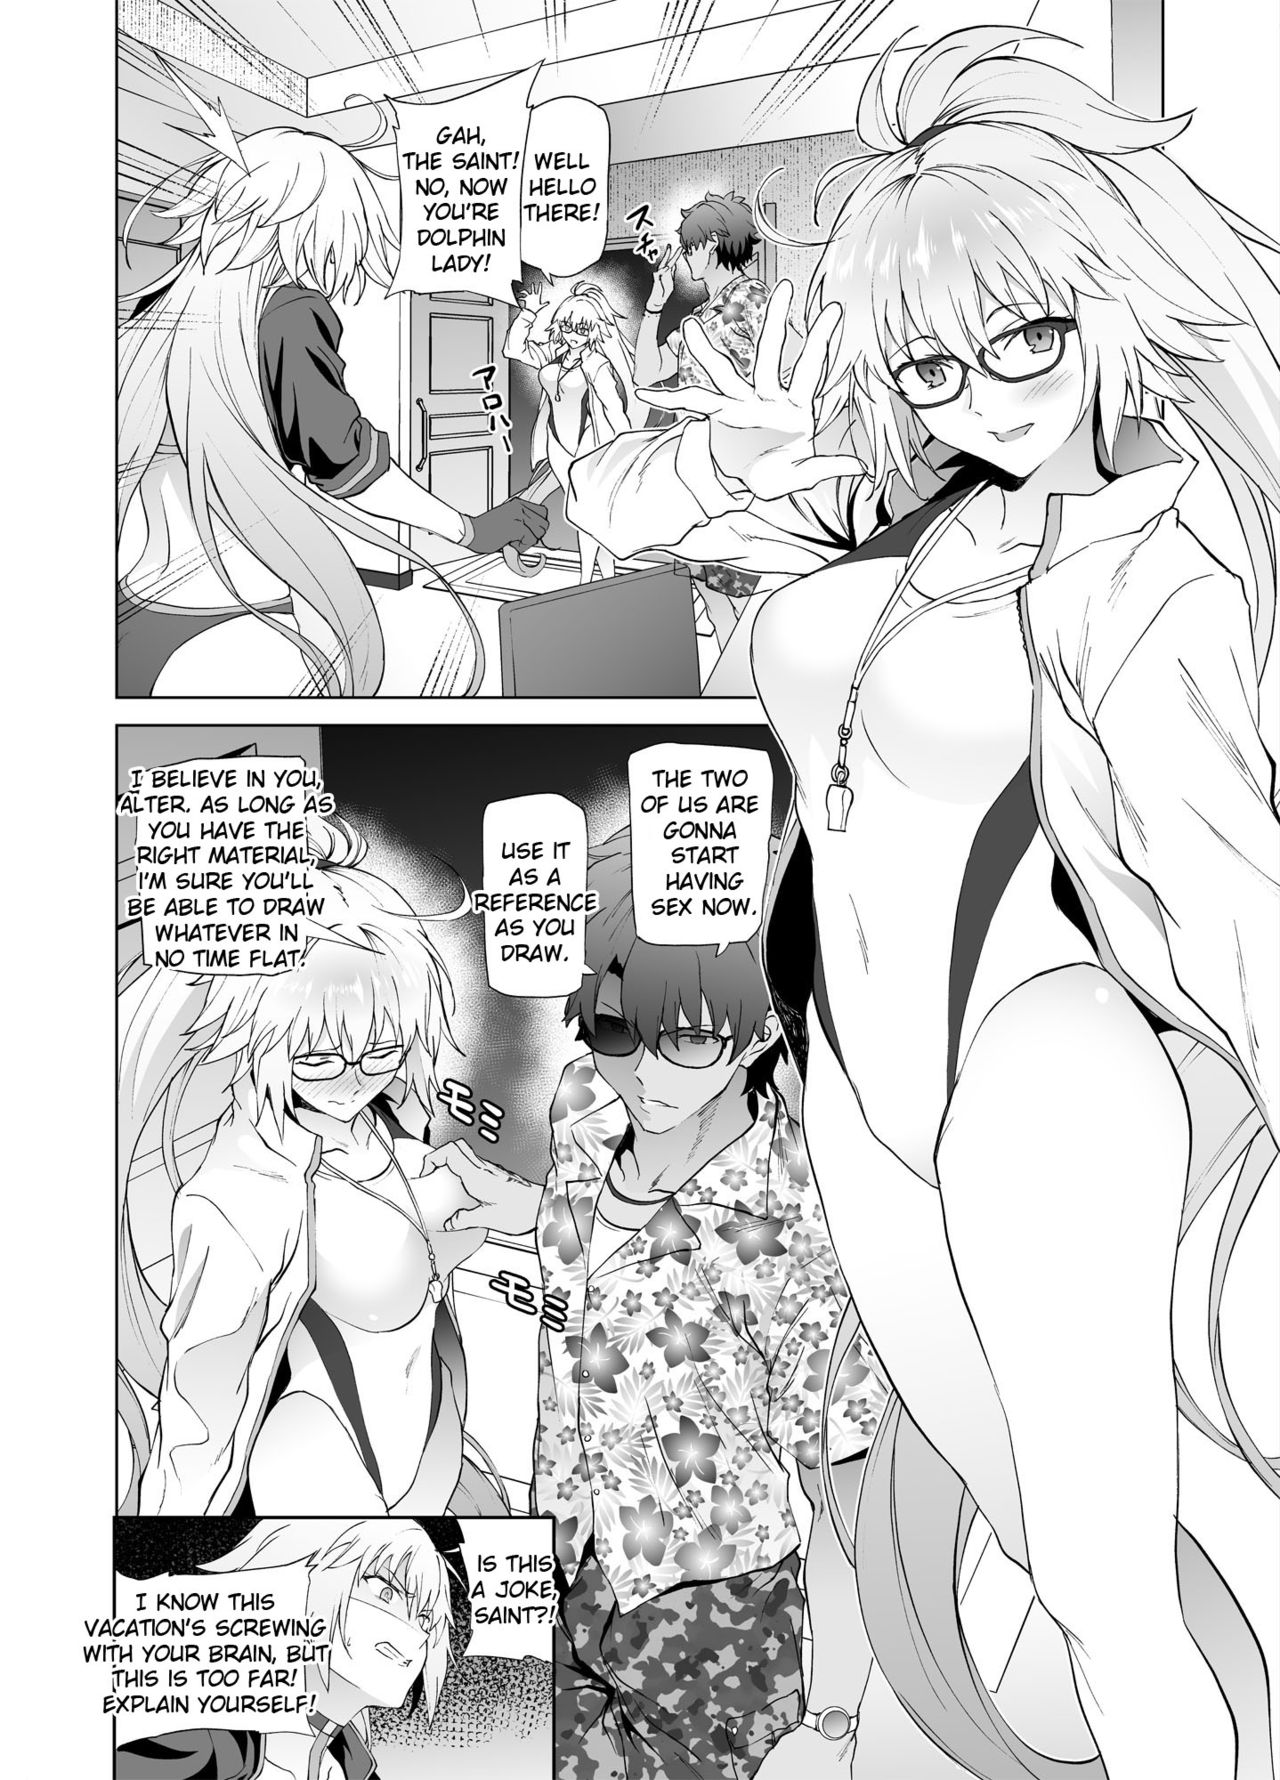 [EXTENDED PART (Endo Yoshiki)] Jeanne W (Fate/Grand Order) [Digital] (English) page 7 full